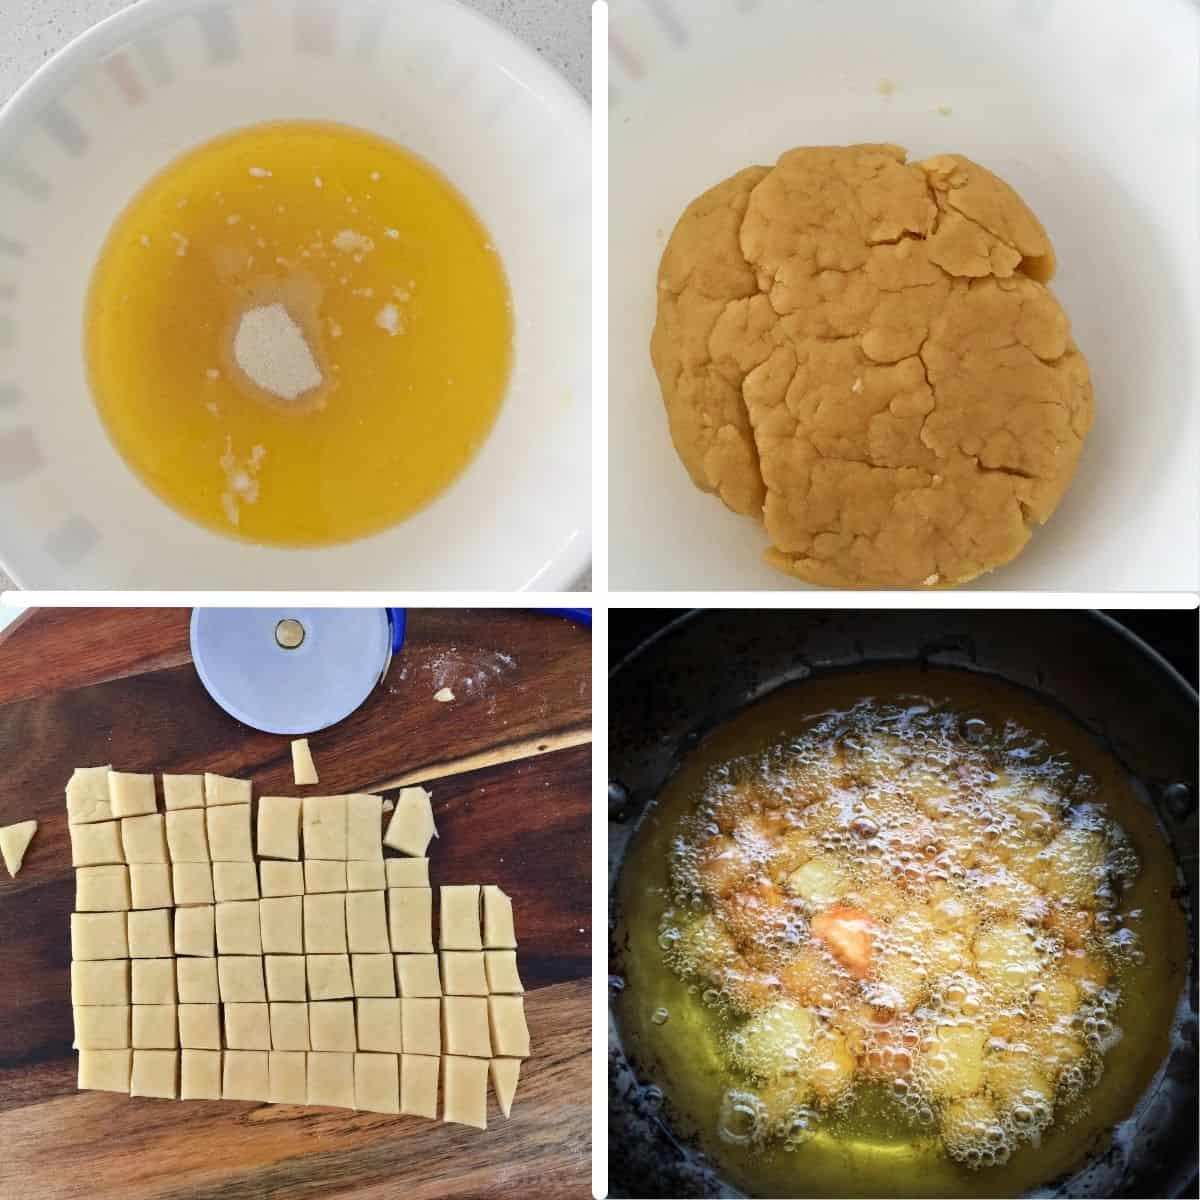 Make dough and cut into small squares.